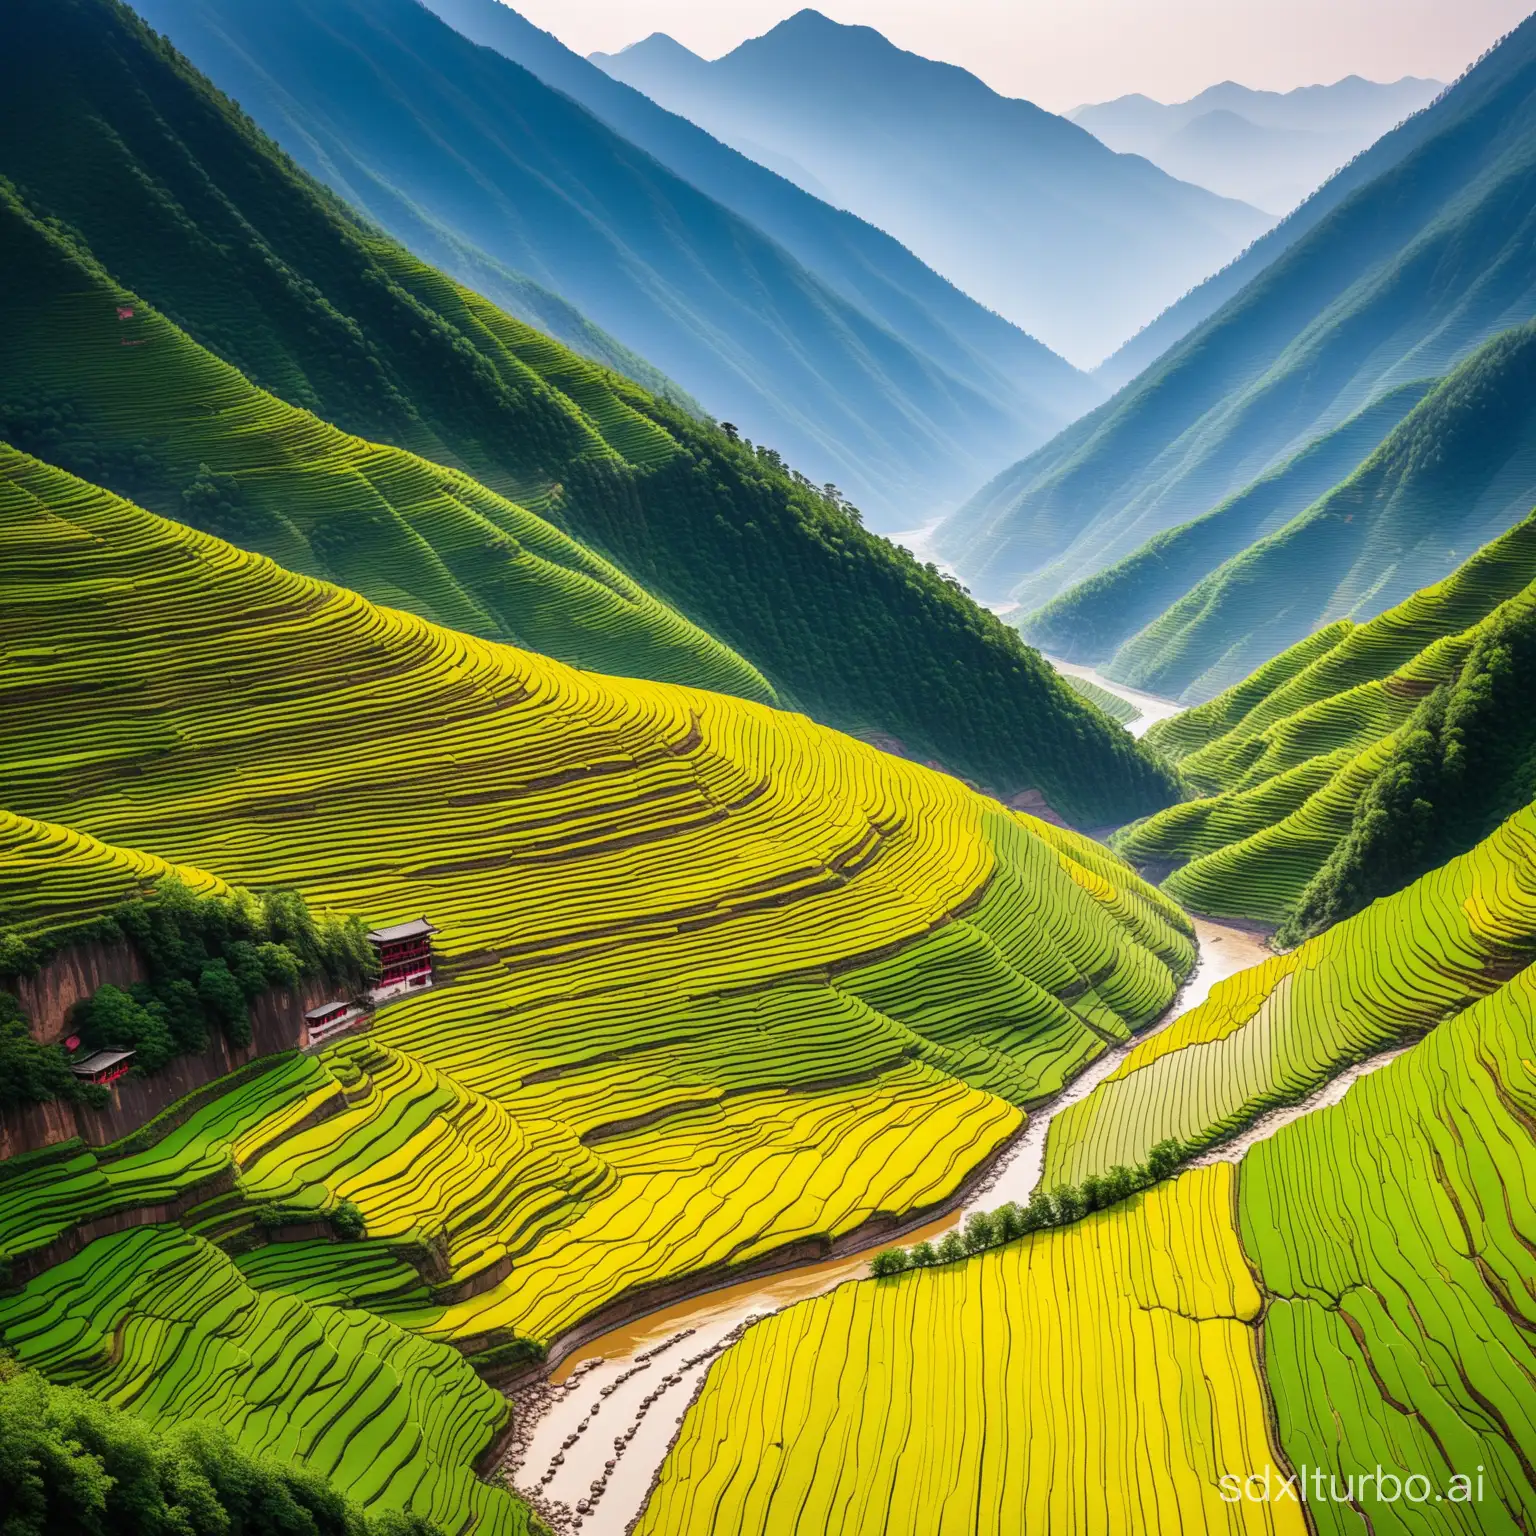 Vibrant-Sichuan-Landscape-with-Misty-Mountains-and-Serene-Rivers